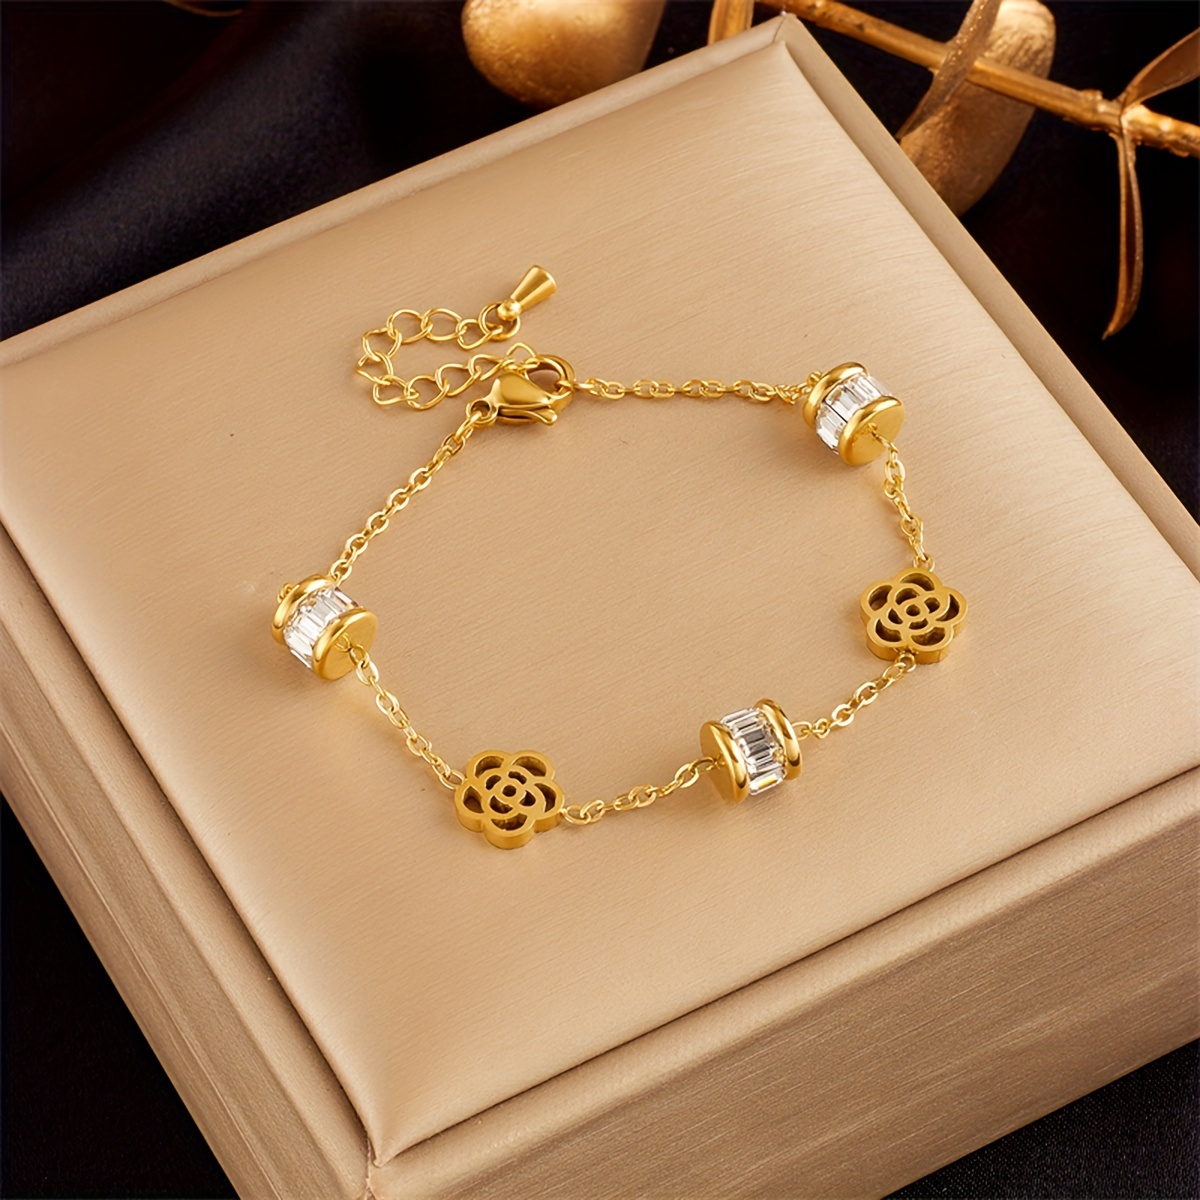 

Elegant Stainless Steel Gold-tone Bracelet With Hollow Flower Charms And Shimmering Accents, Adjustable Link Chain, Unisex Jewelry For Gifting And Banquets